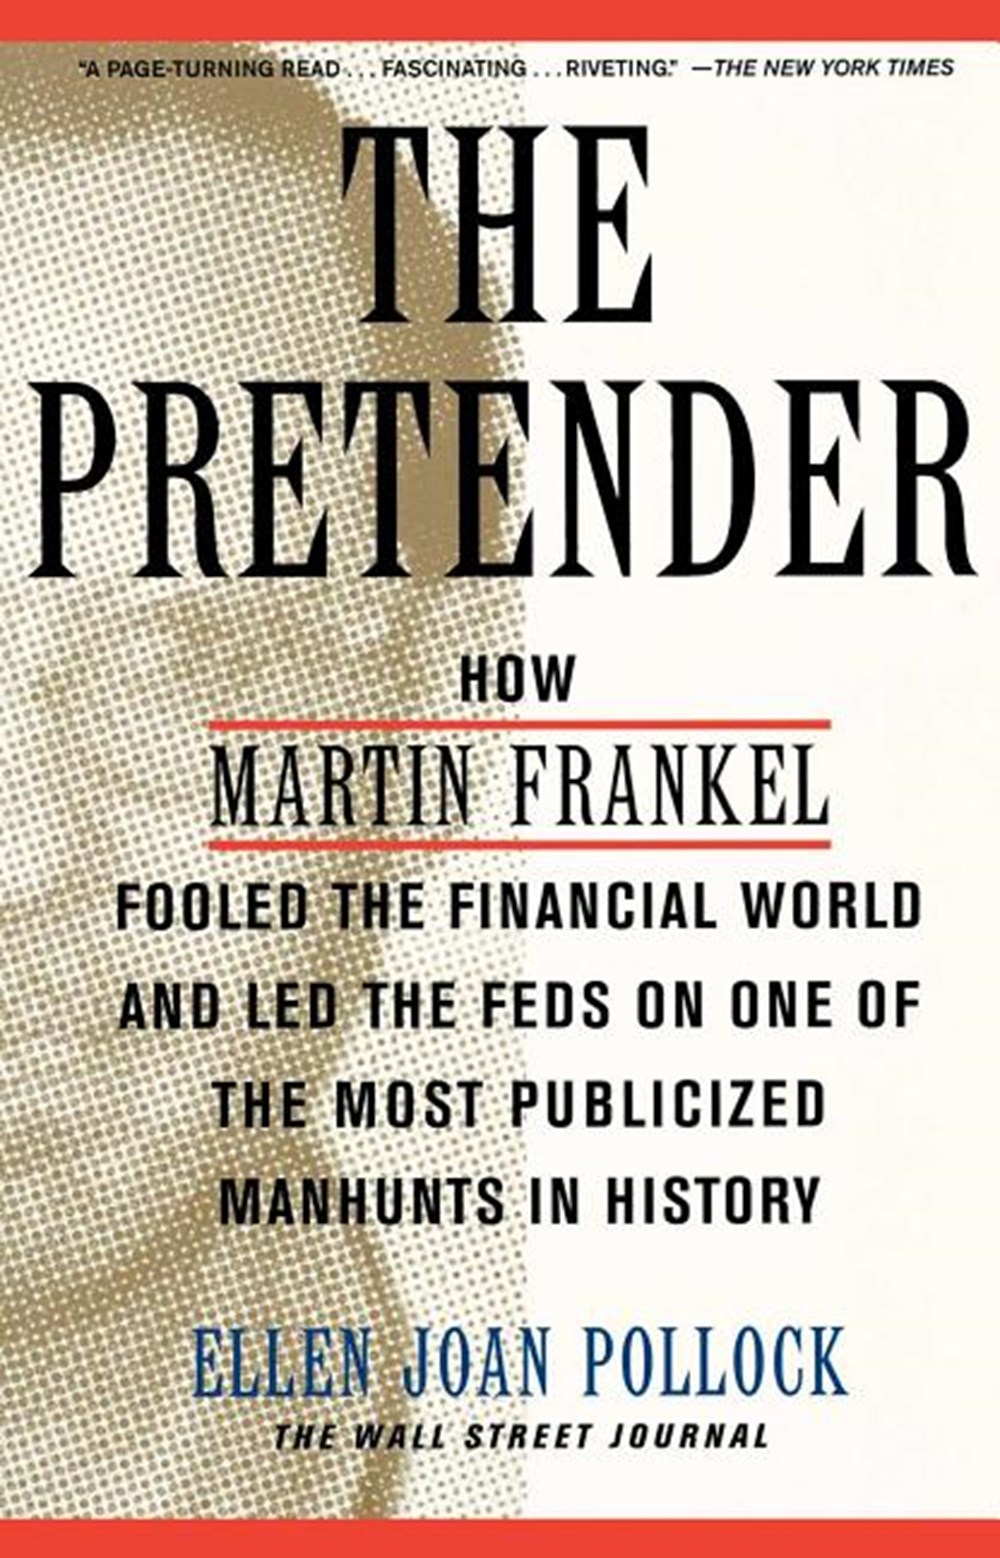 Pretender: How Martin Frankel Fooled the Financial World and Led the Feds on One of the Most Publici